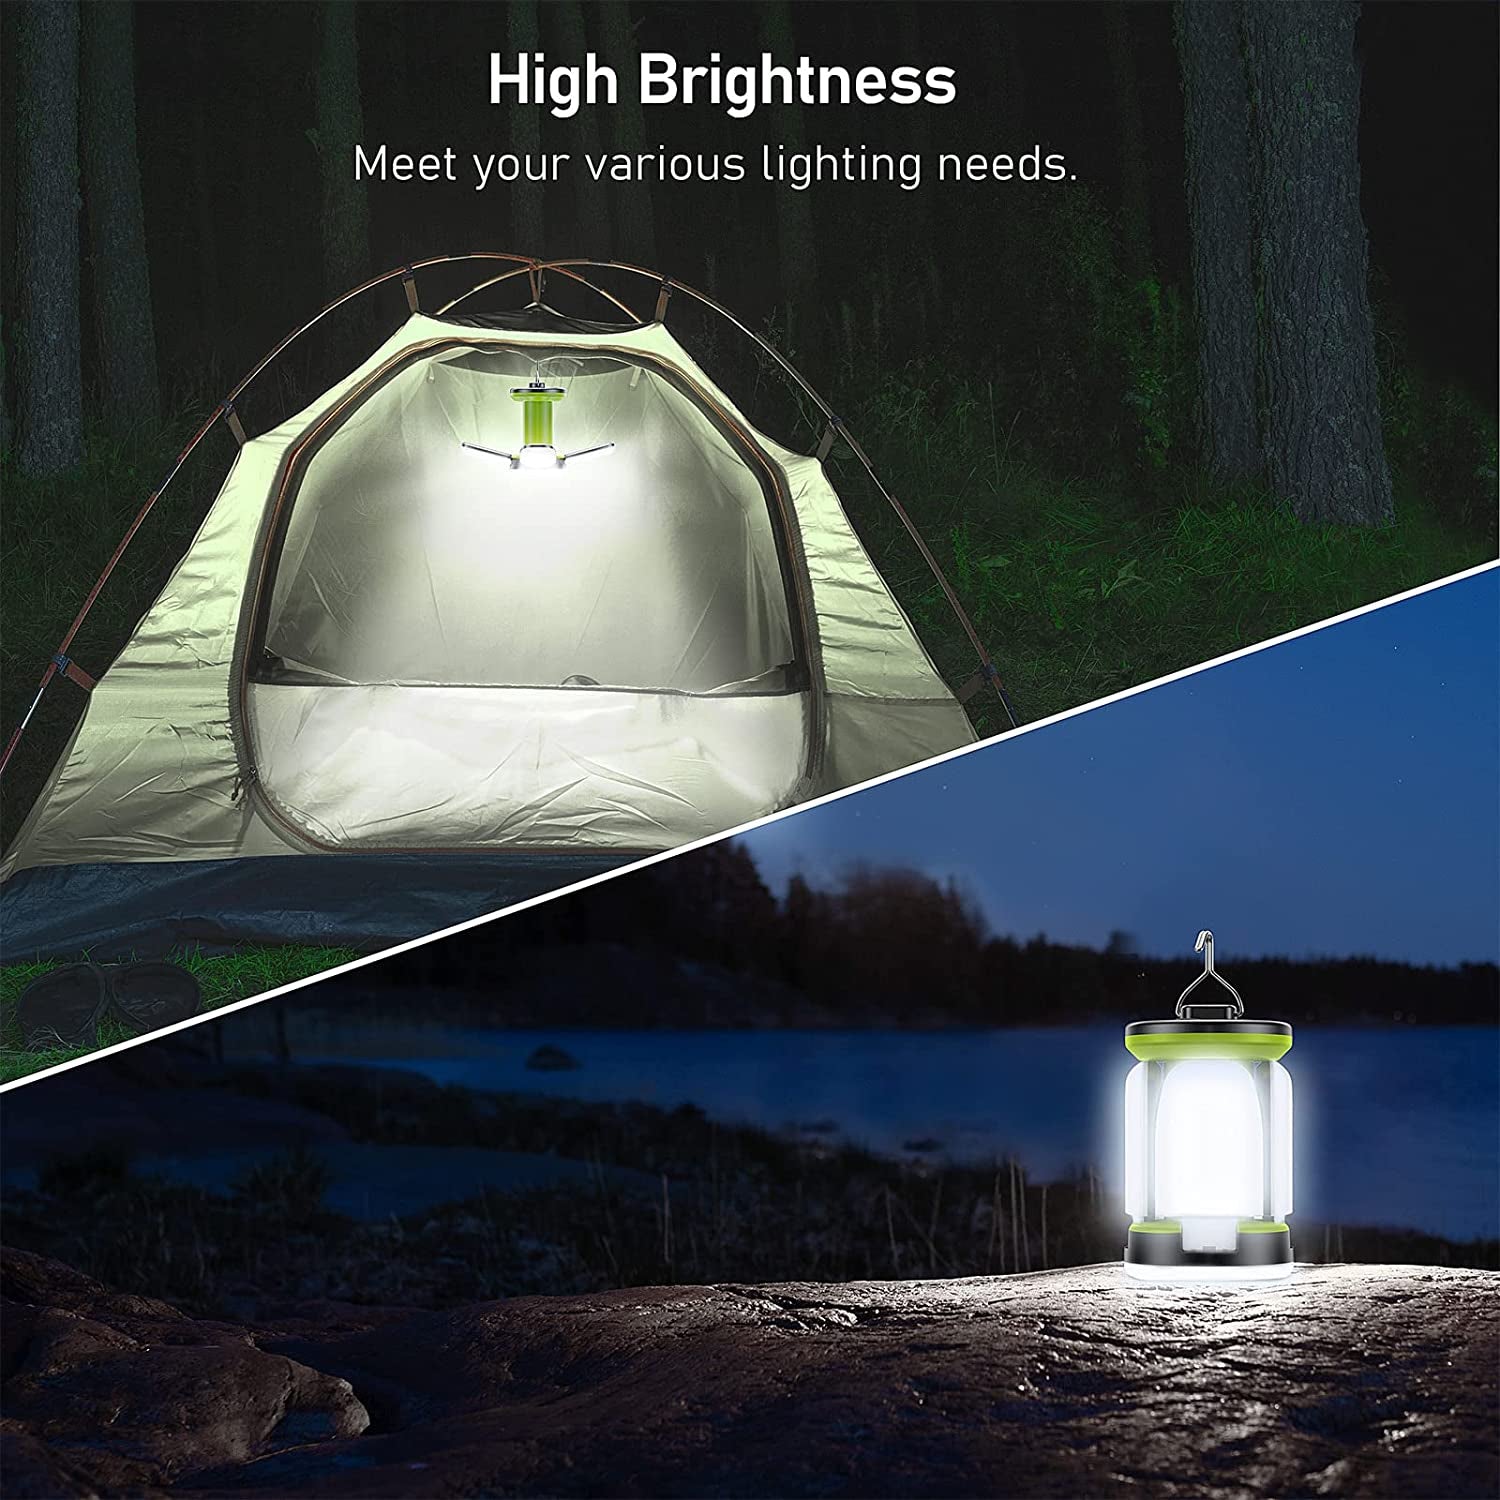 Camping Lantern Rechargeable,  Camping Lights Lamp - 7 Light Modes 60 LED Ultra Bright LED Tent Light 10+ Hrs Battery Life for Camping, Emergency, Fishing, Hiking Etc.